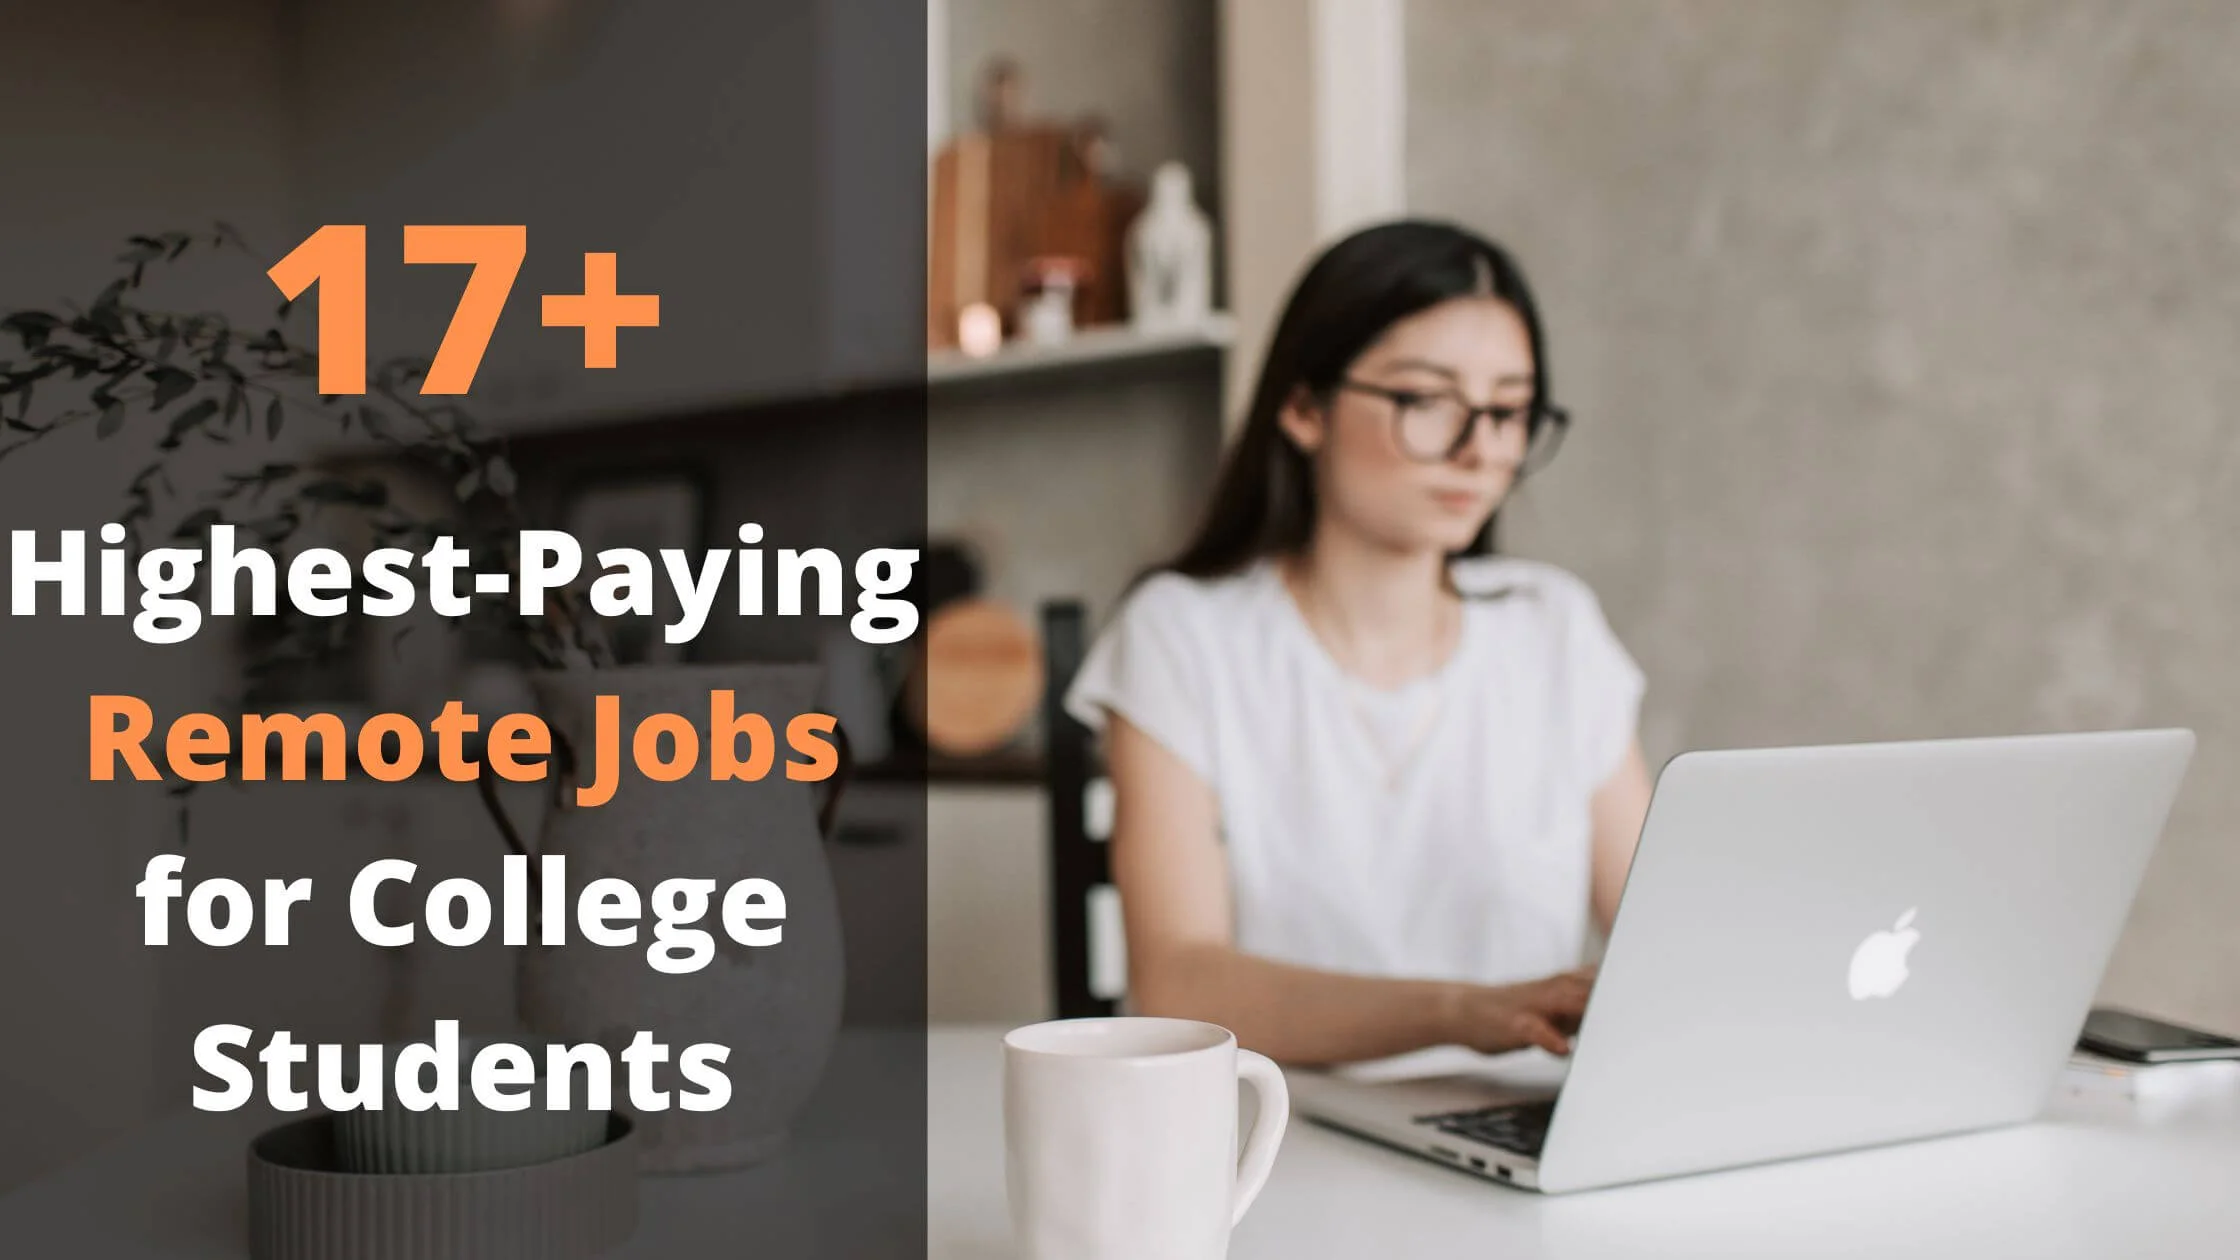 Remote Jobs for College Students